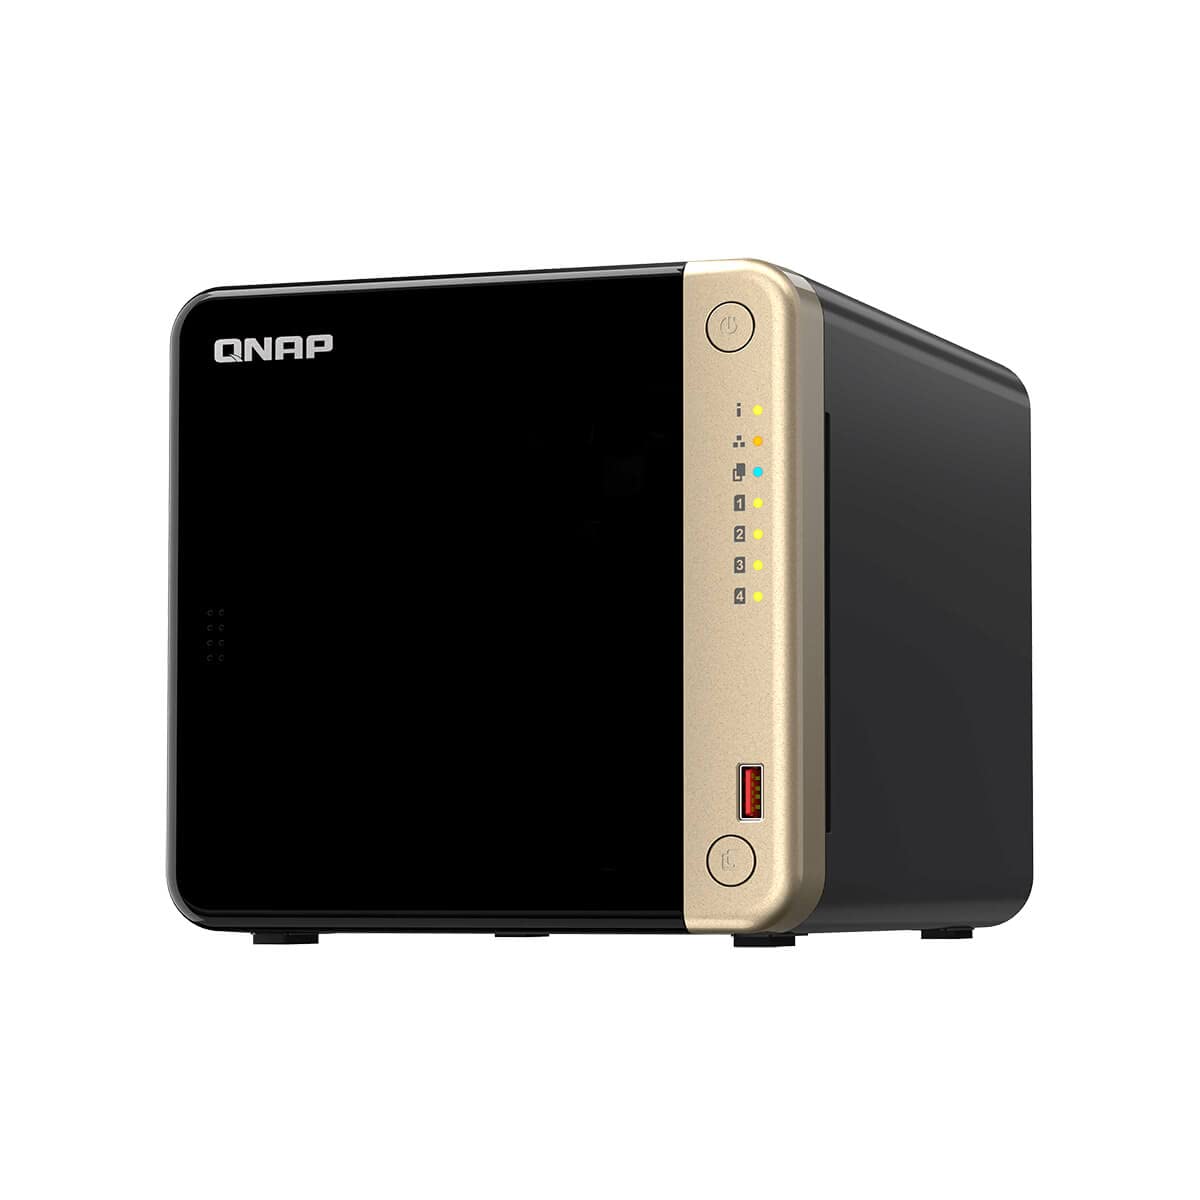 QNAP TS-464-4G (Quad-core Intel for Multitasking, 2.5GbE Multimedia HDMI NAS with M.2 PCIe Slots and PCIe expandability) - Black